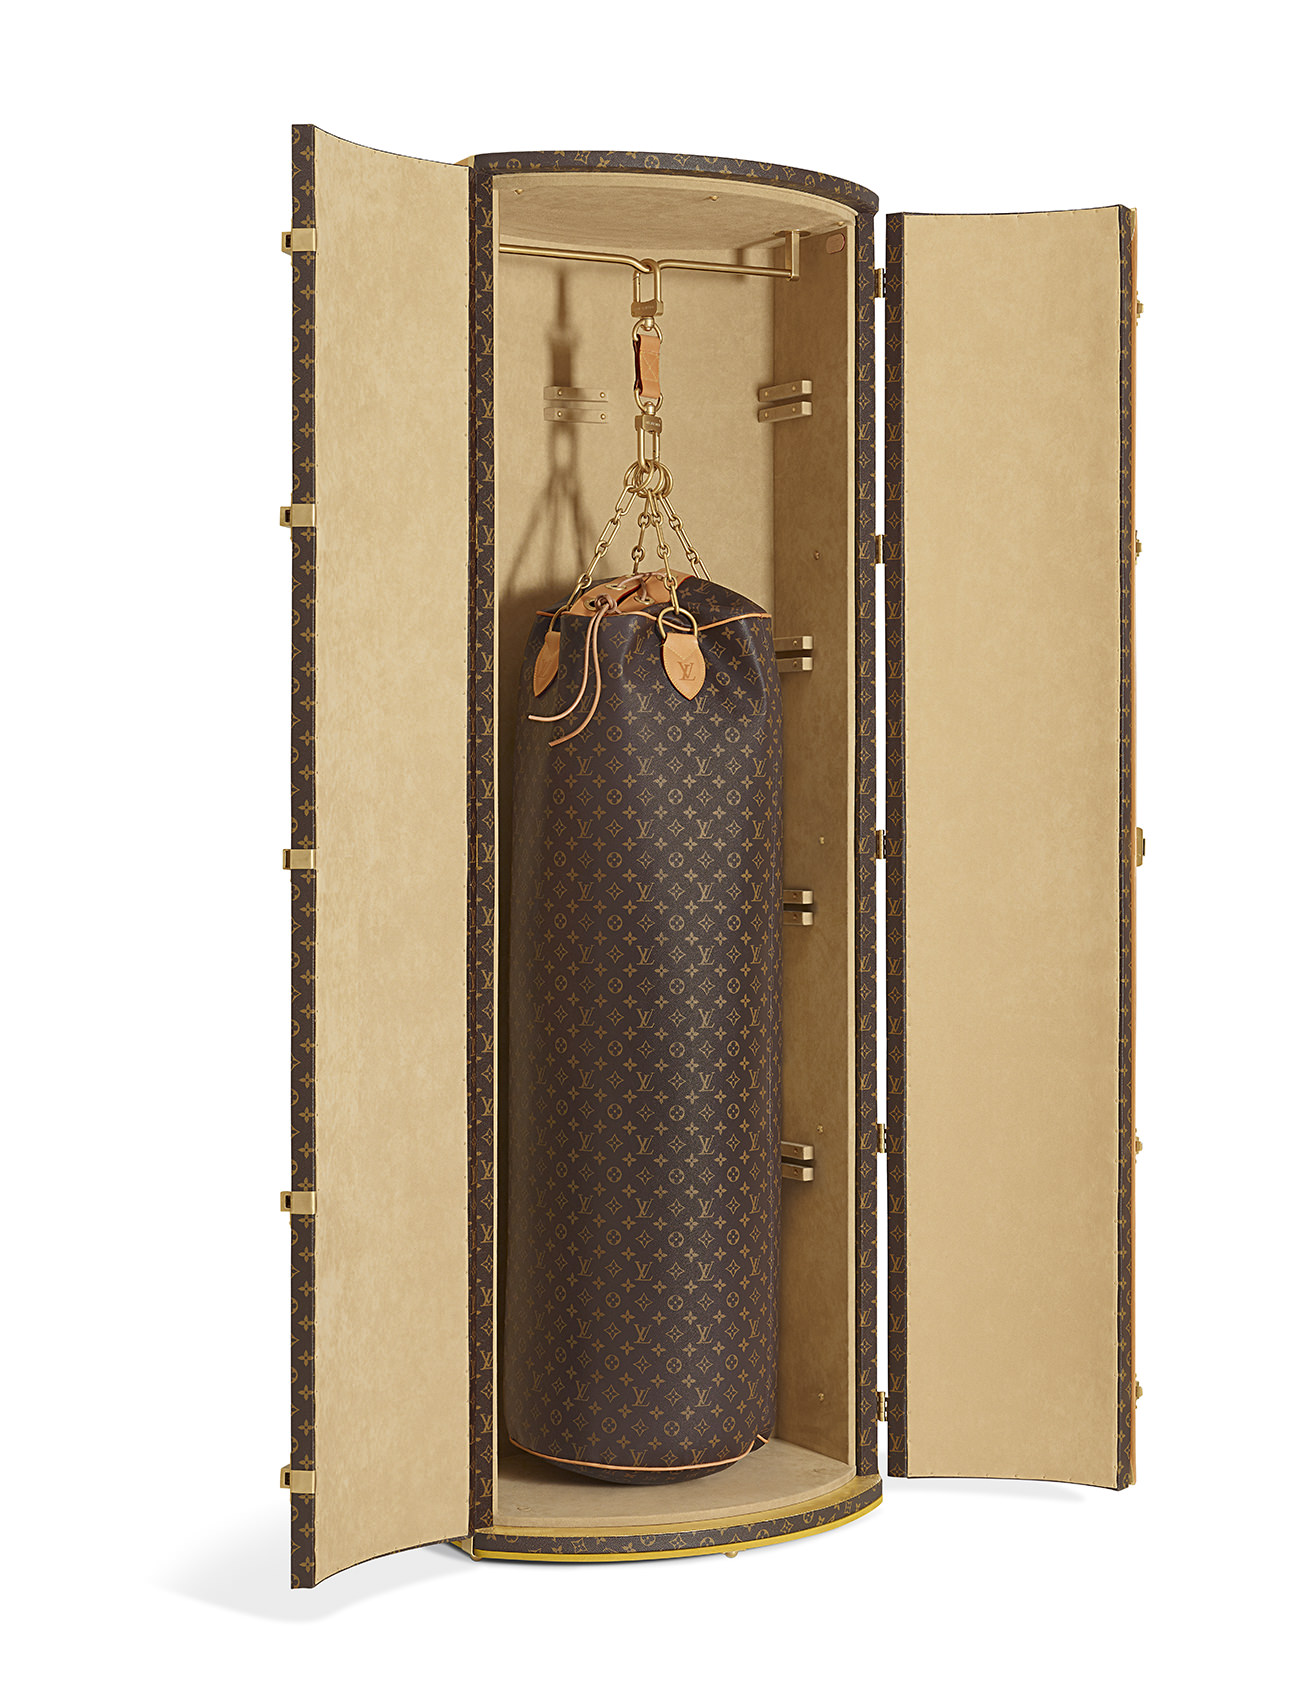 A LIMITED EDITION ICONOCLAST BOXING SET: A MAT, TWO GLOVES & CARRYING CASE  BY KARL LAGERFELD, LOUIS VUITTON, 2014